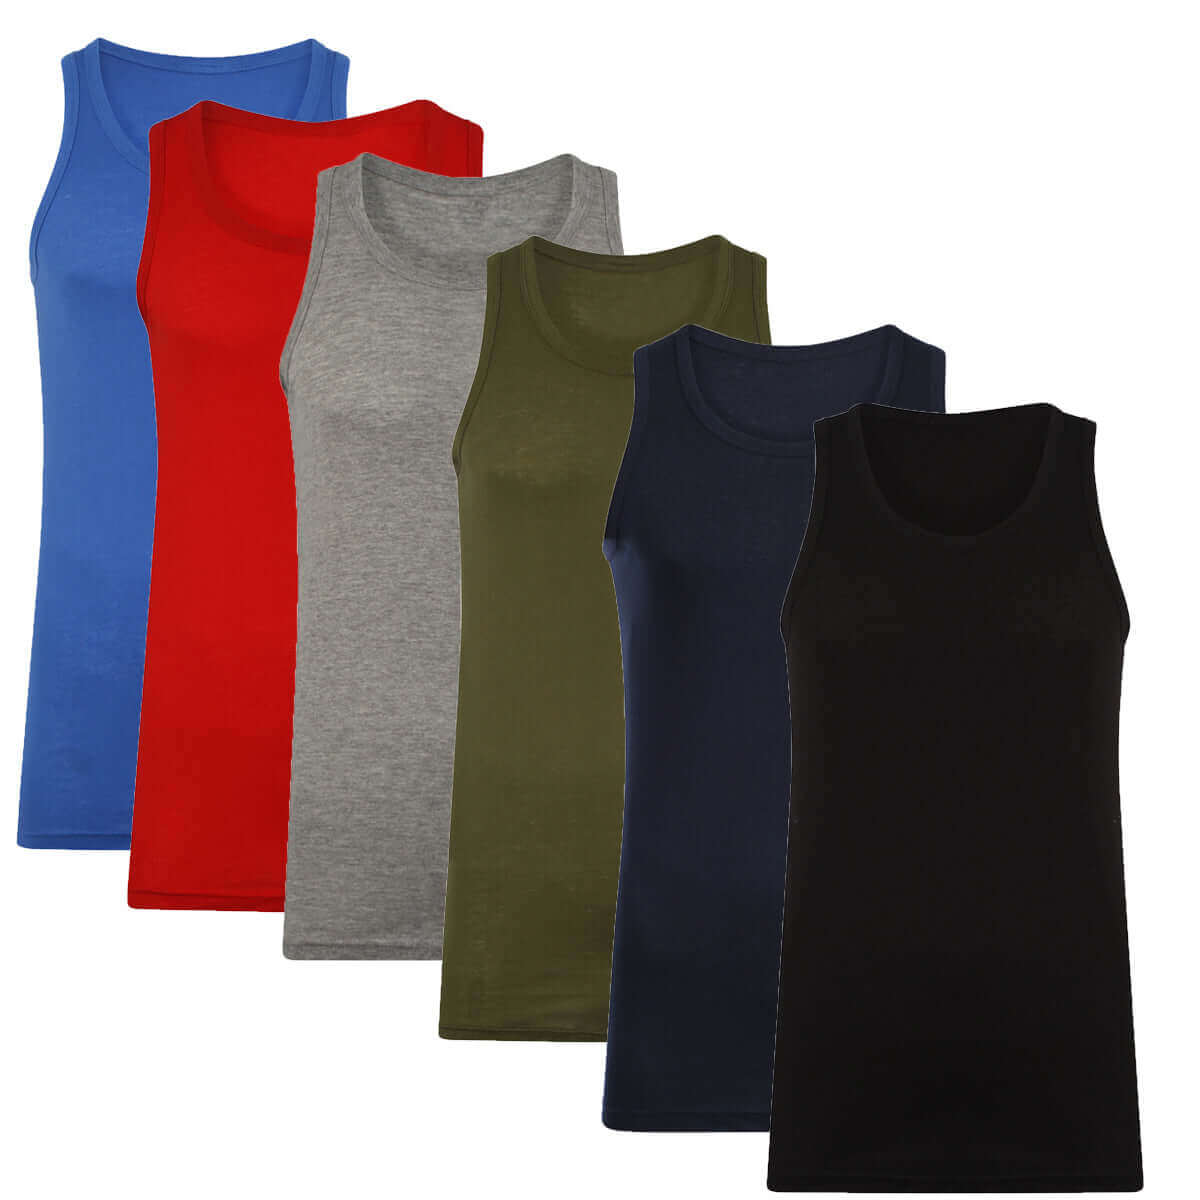 Pack of 3 Men's Vest Fitted Plain 100% Cotton Muscle Gym Summer Top Vests. Buy now for £5.00. A Vests by Sock Stack. assorted, athletics, boys, breathable, clothing, comfortable, cotton, dressing, gym, home, medium, mens, outdoor, small, soft, sports, sum